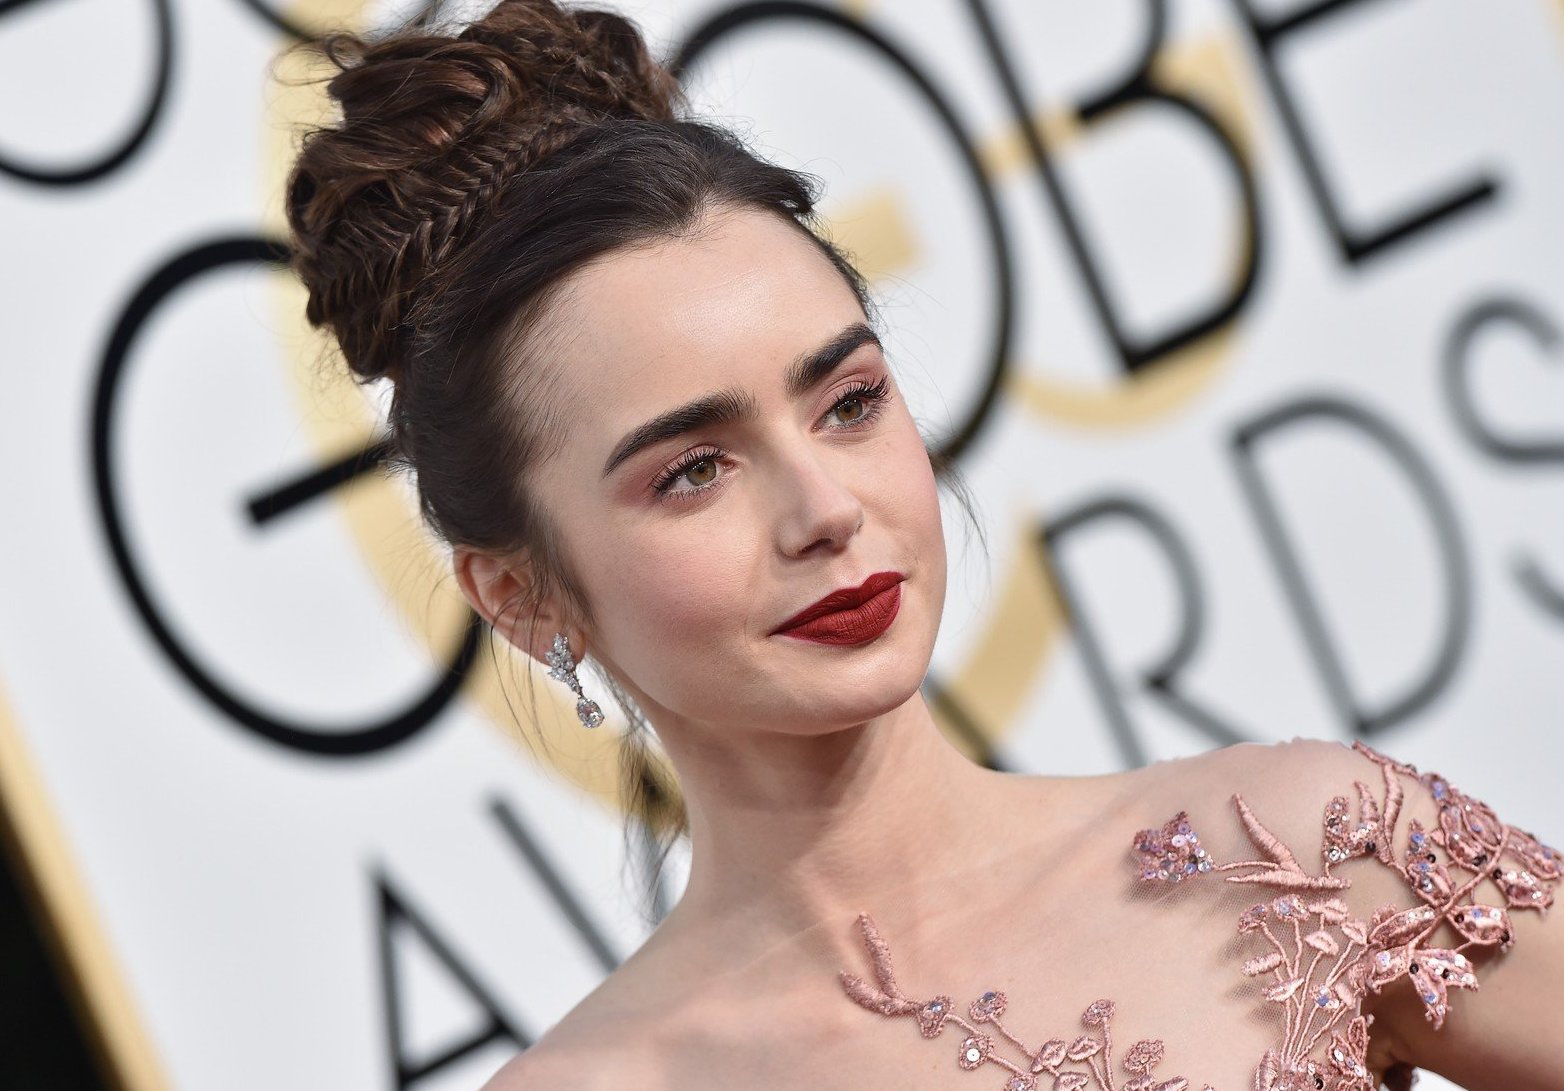 74th Annual Golden Globe Awards - Arrivals. The Beverly Hilton Hotel, Beverly Hills, CA. Pictured: Lily Collins. EVENT January 8, 2016 Job: 170108A2, Image: 310362078, License: Rights-managed, Restrictions: 000, Model Release: no, Credit line: Profimedia, Bauer Griffin